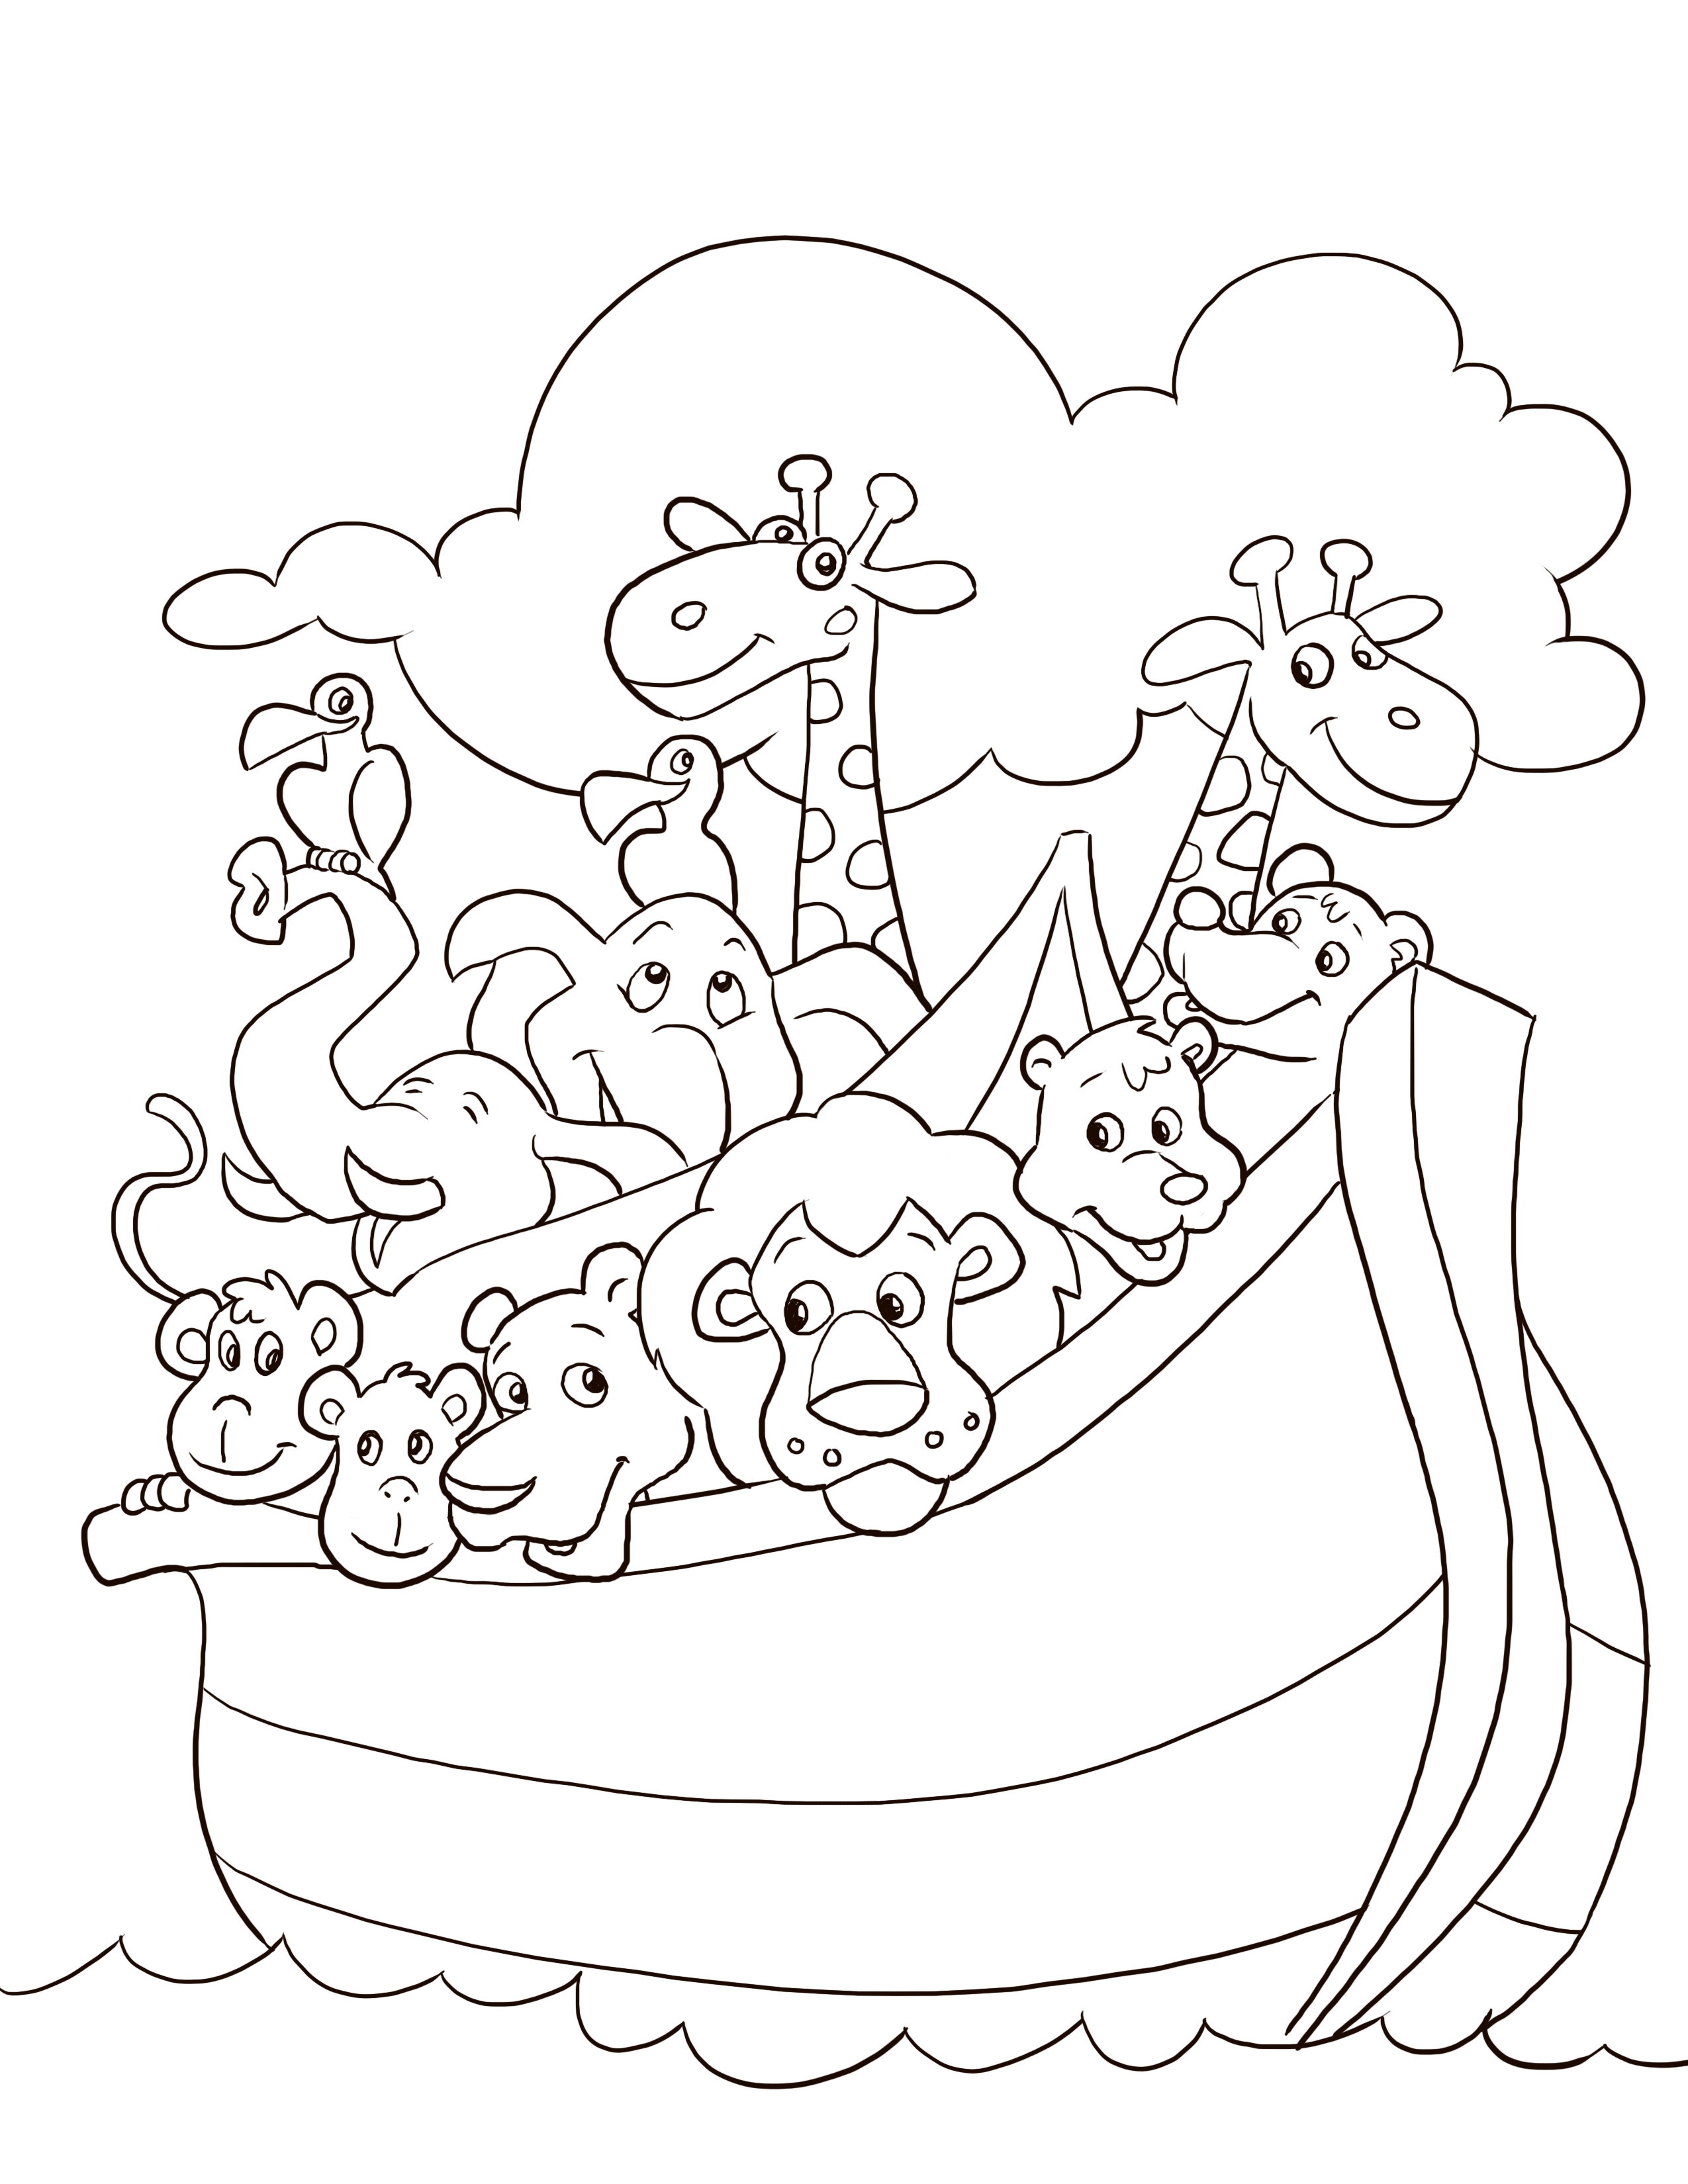 Preschool Sunday School Coloring Pages at GetColorings.com | Free ...